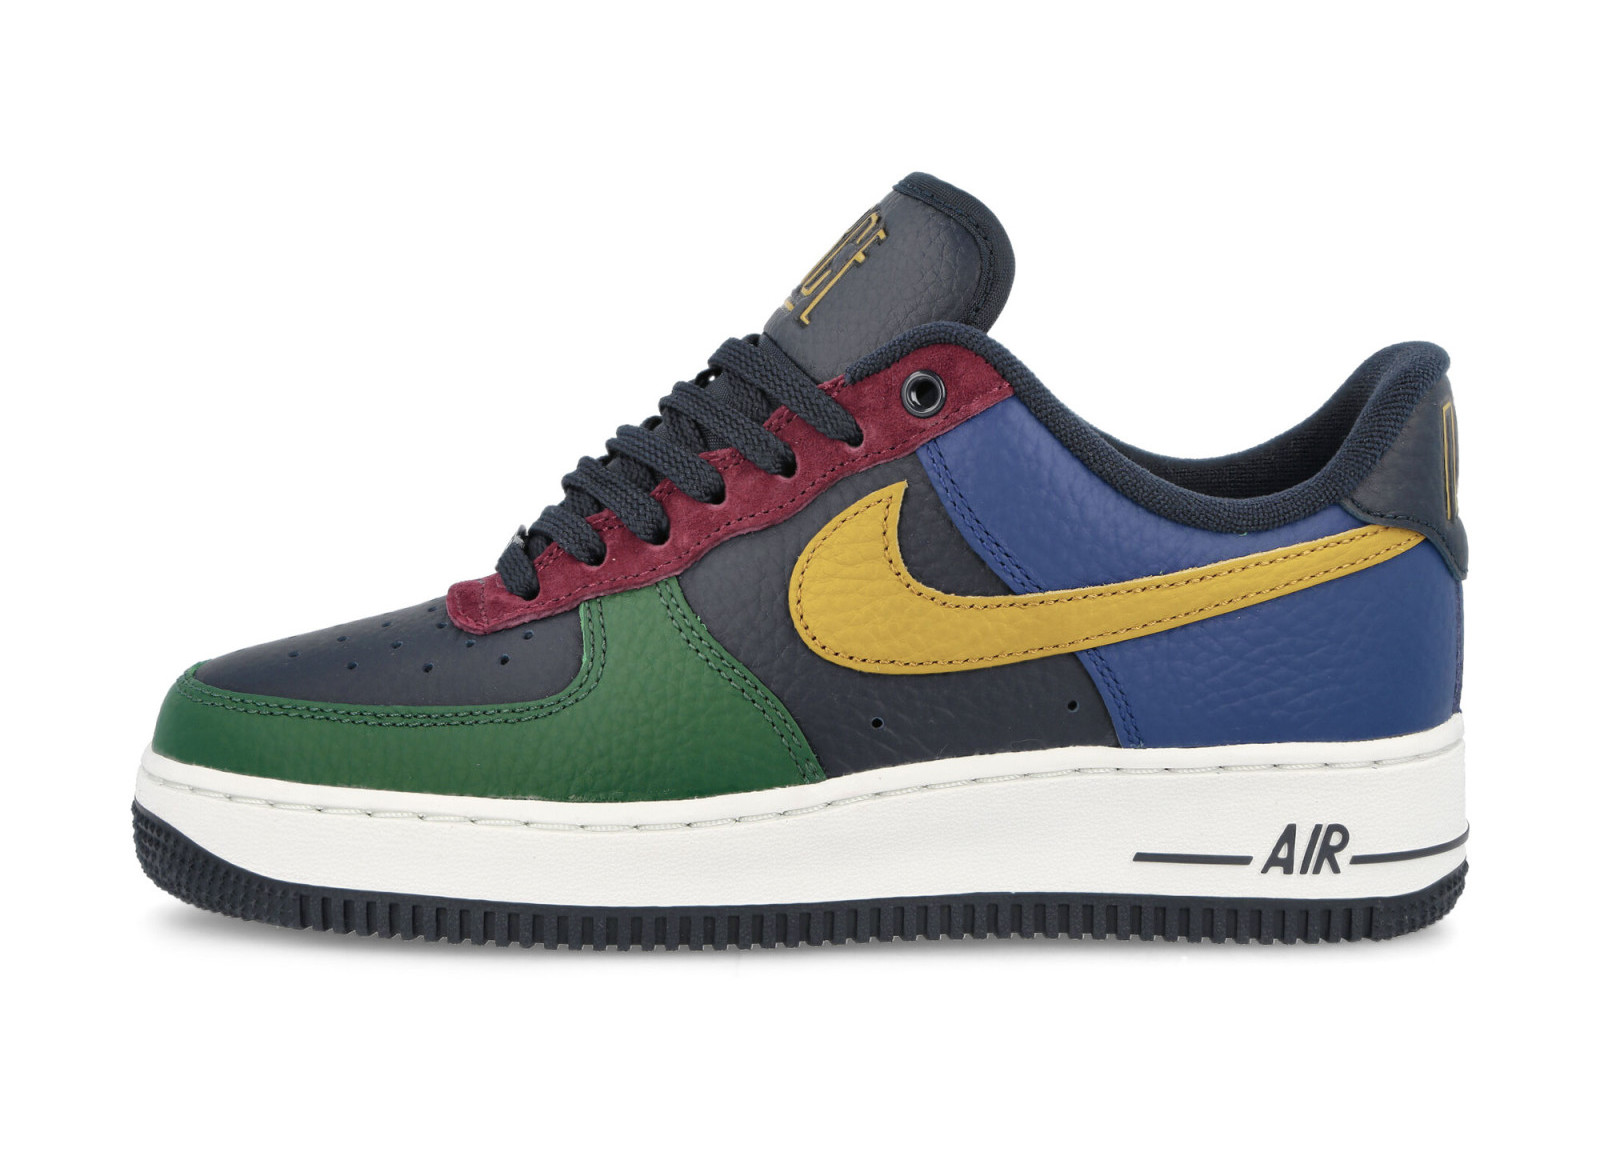 Nike Air Force 1 07 LX
Green / Gold Suede